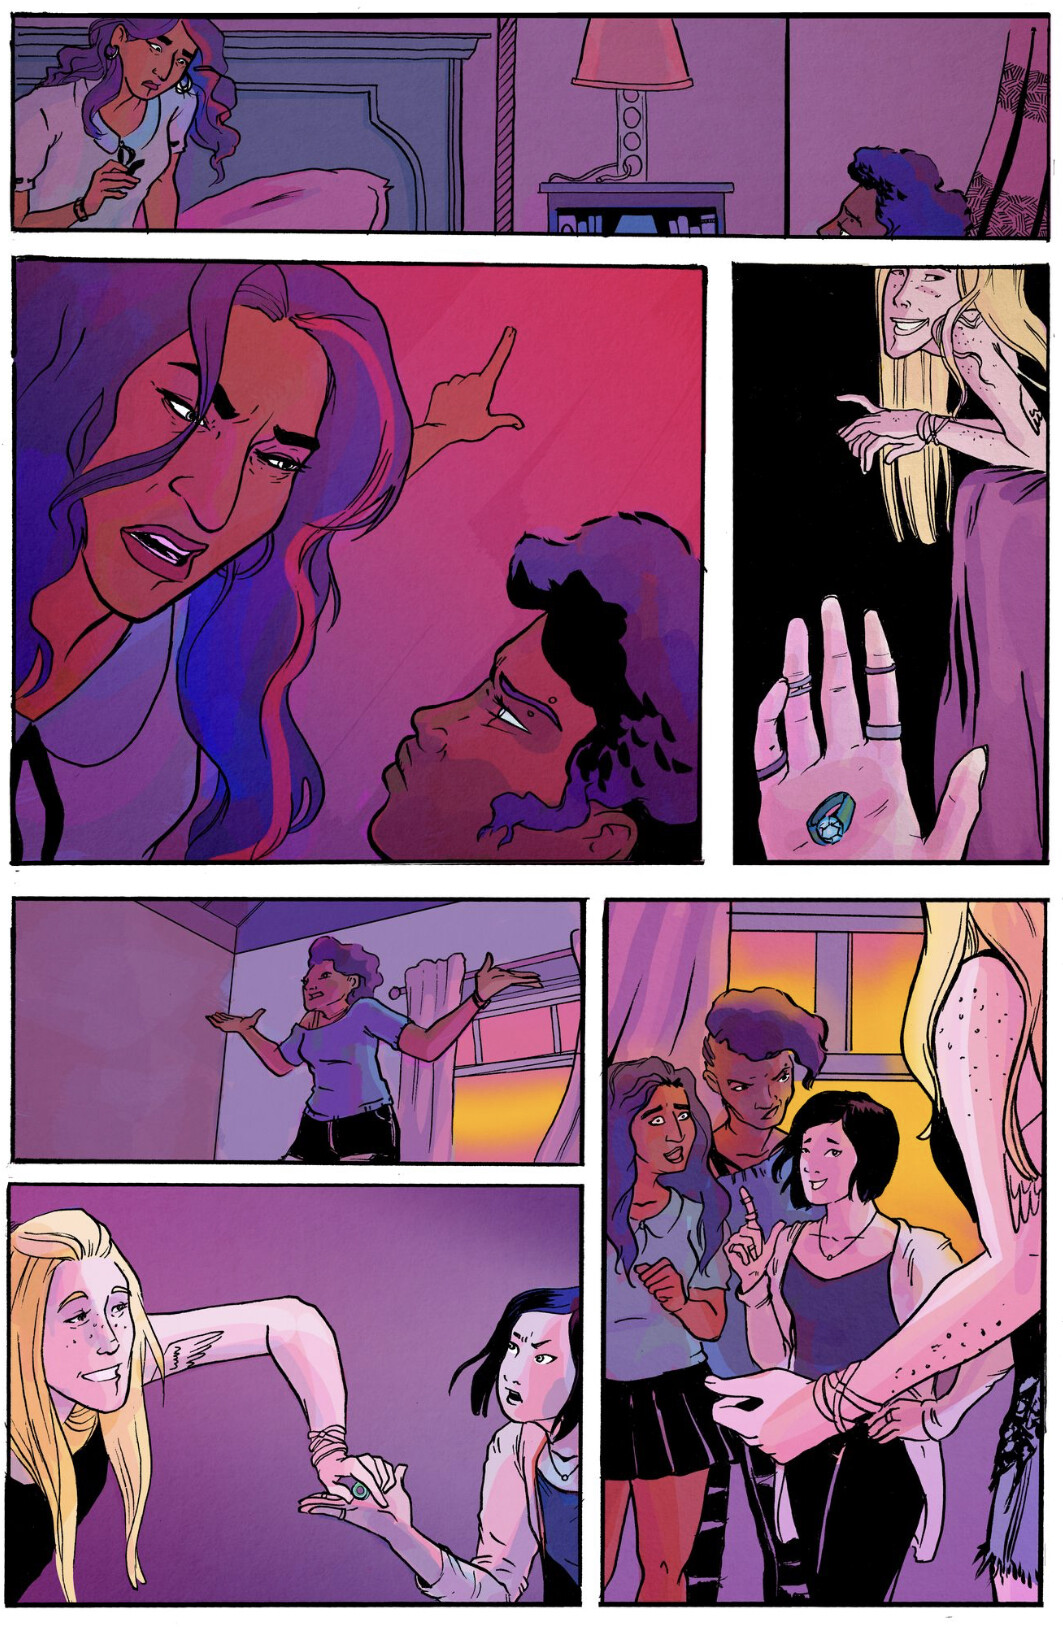 Comic page of girls speaking in room and passing a ring around each other